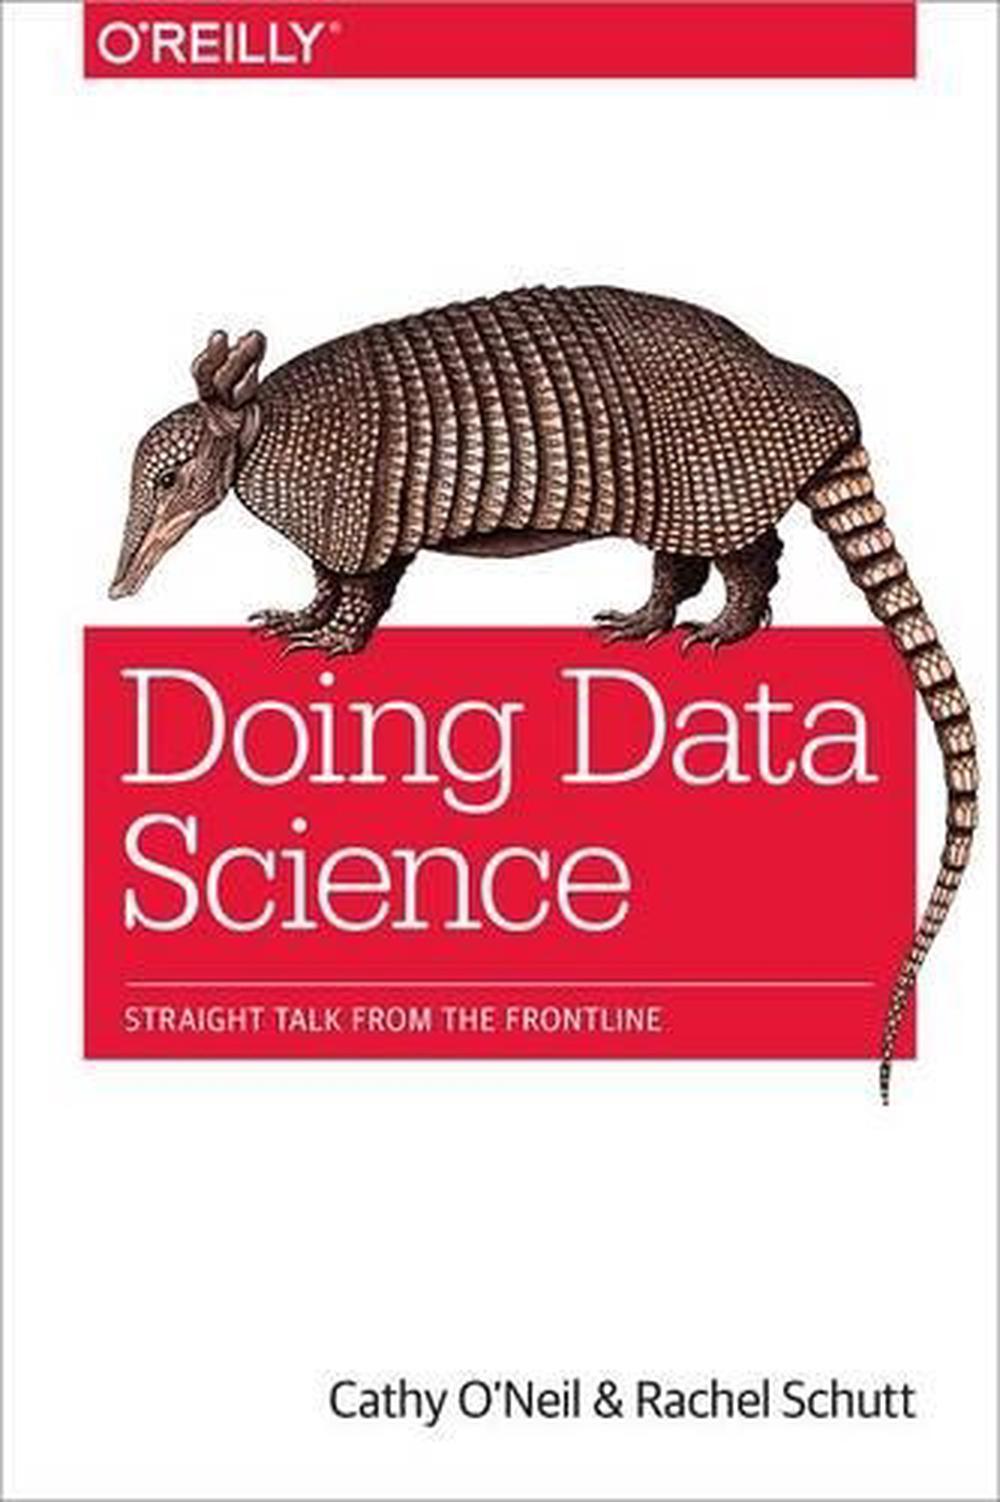 Doing Data Science Straight Talk from the Frontline by Cathy O'Neil